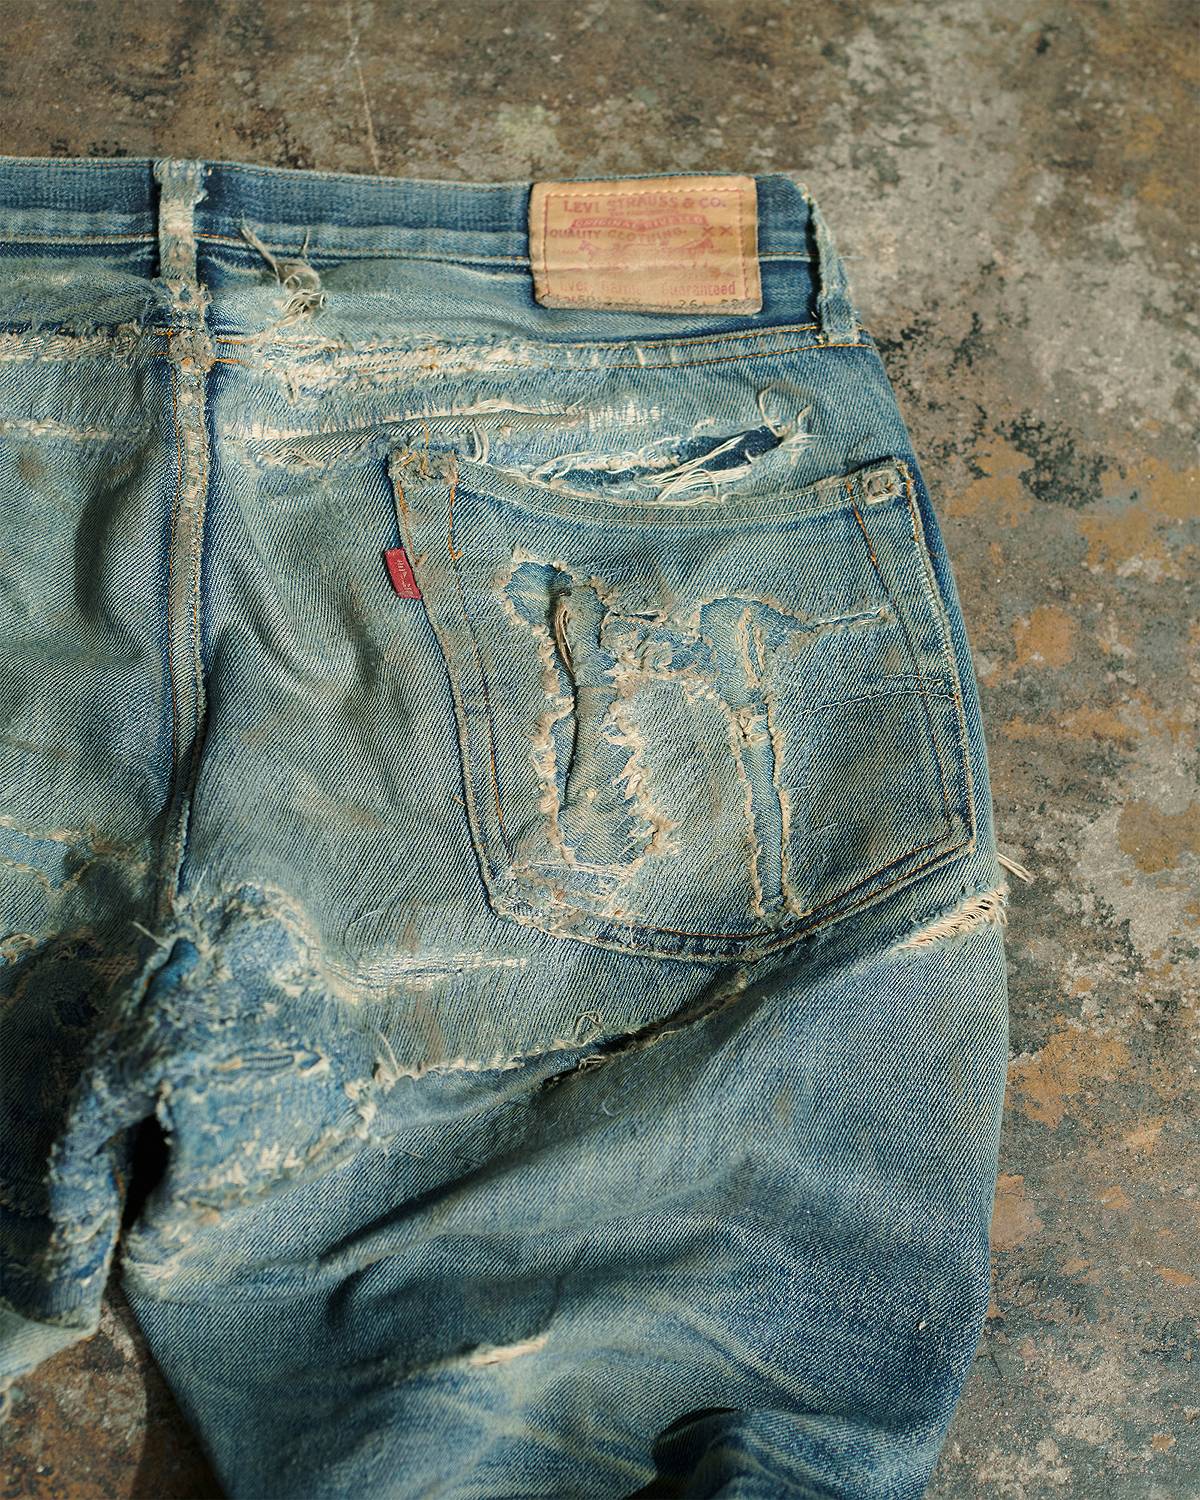 501 Jeans: Vintage Jeans Loved by Change-Makers | Off The Cuff